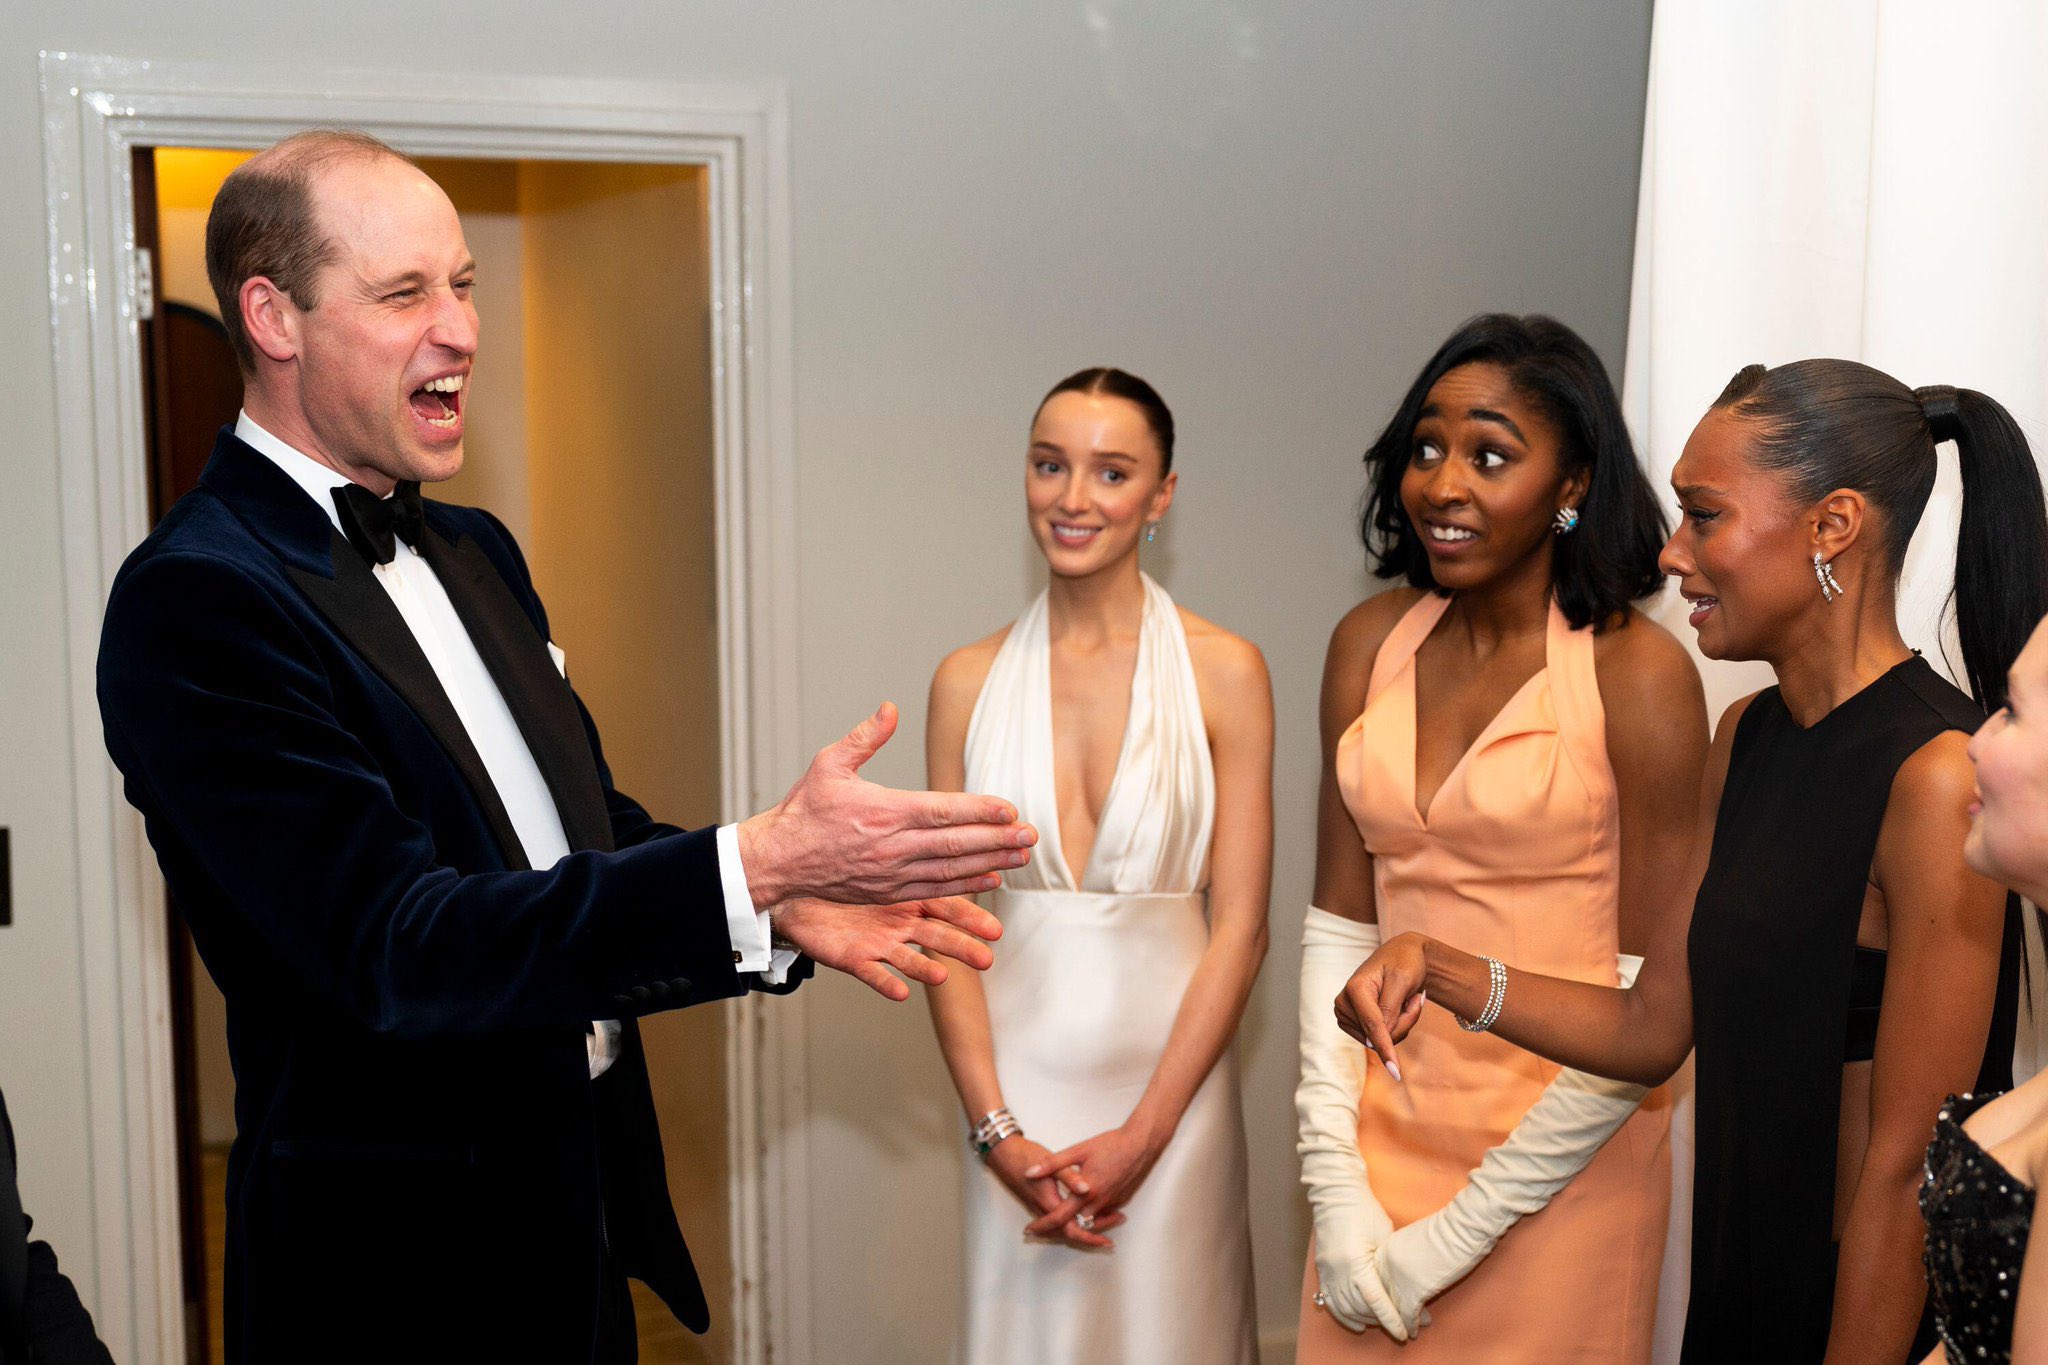 Prince William scaring the hoes Blank Meme Template